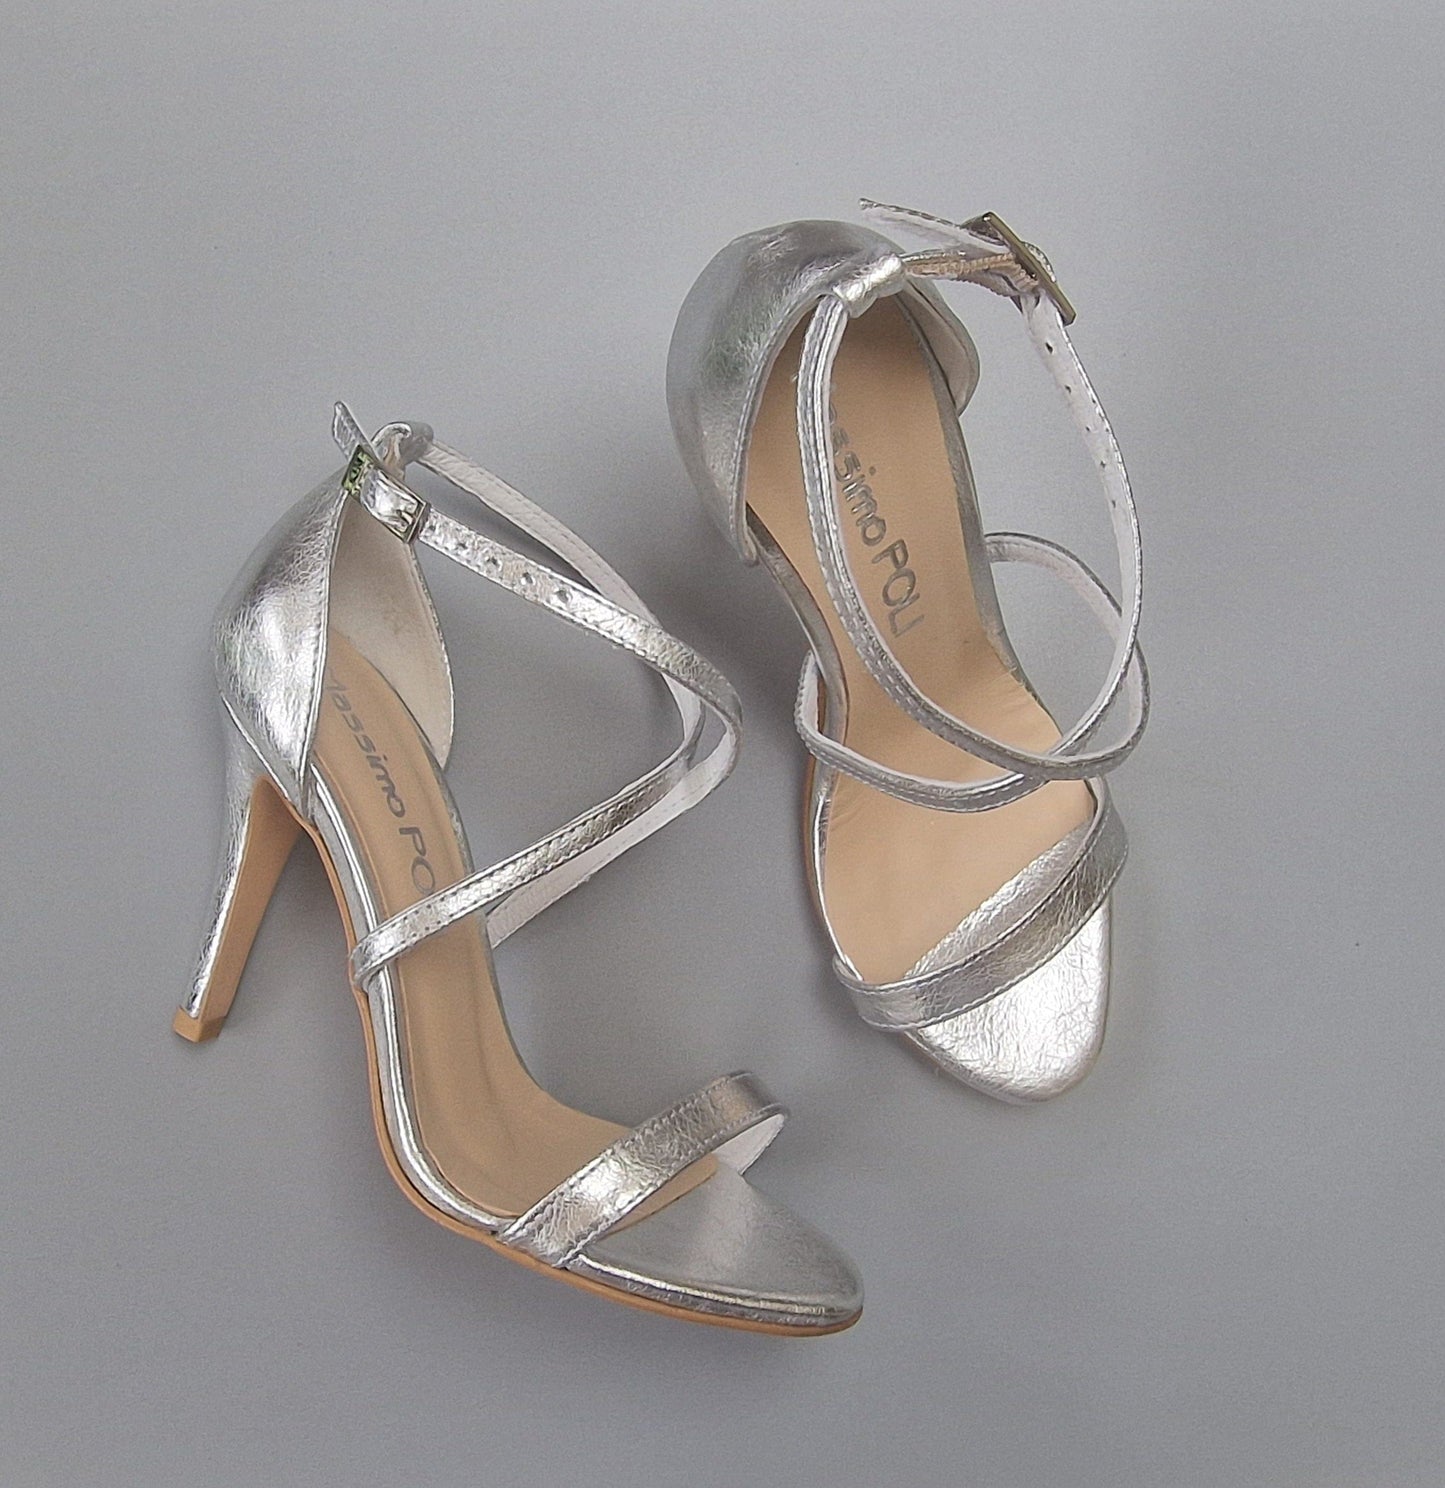 Small size wedding heels in silver leather